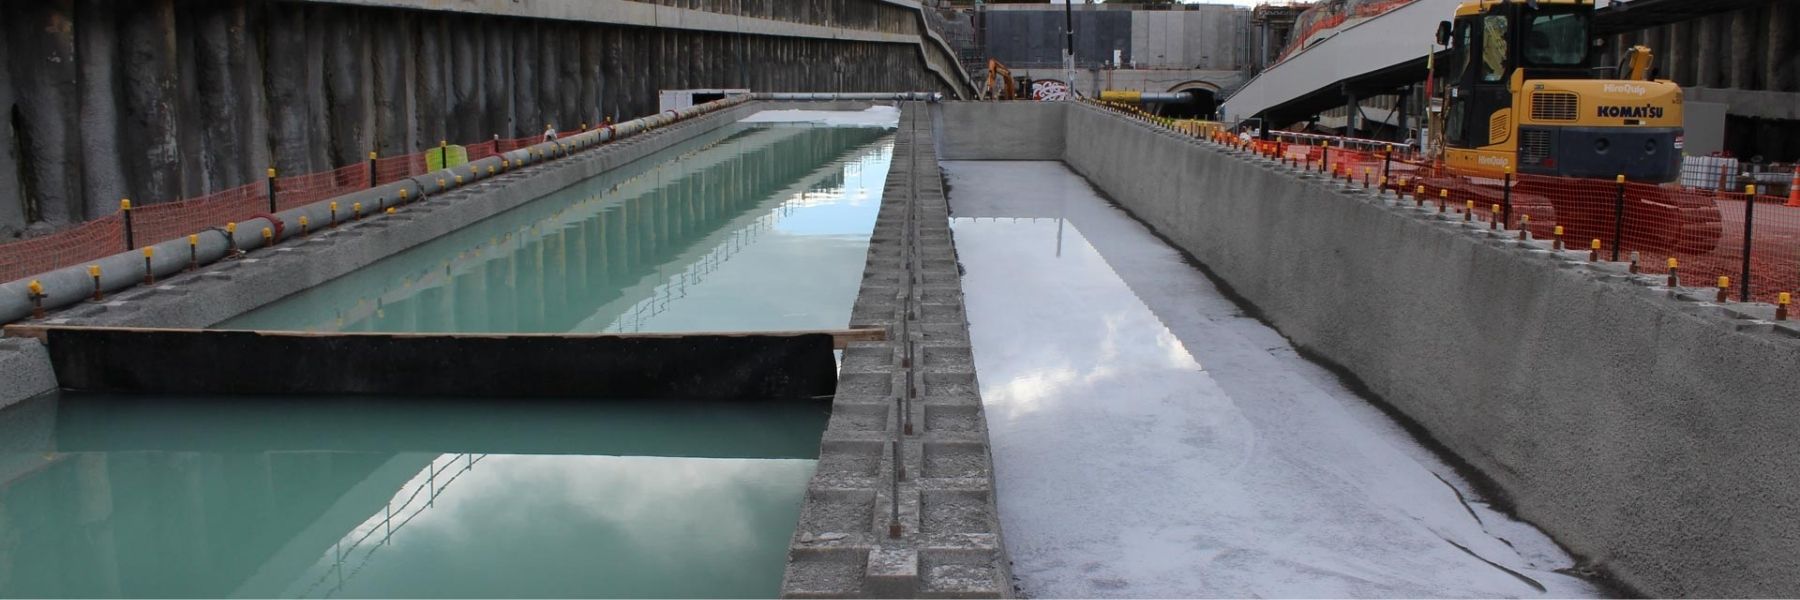 Interbloc concrete blocks forming a settlement pond for the Waterview Tunnel